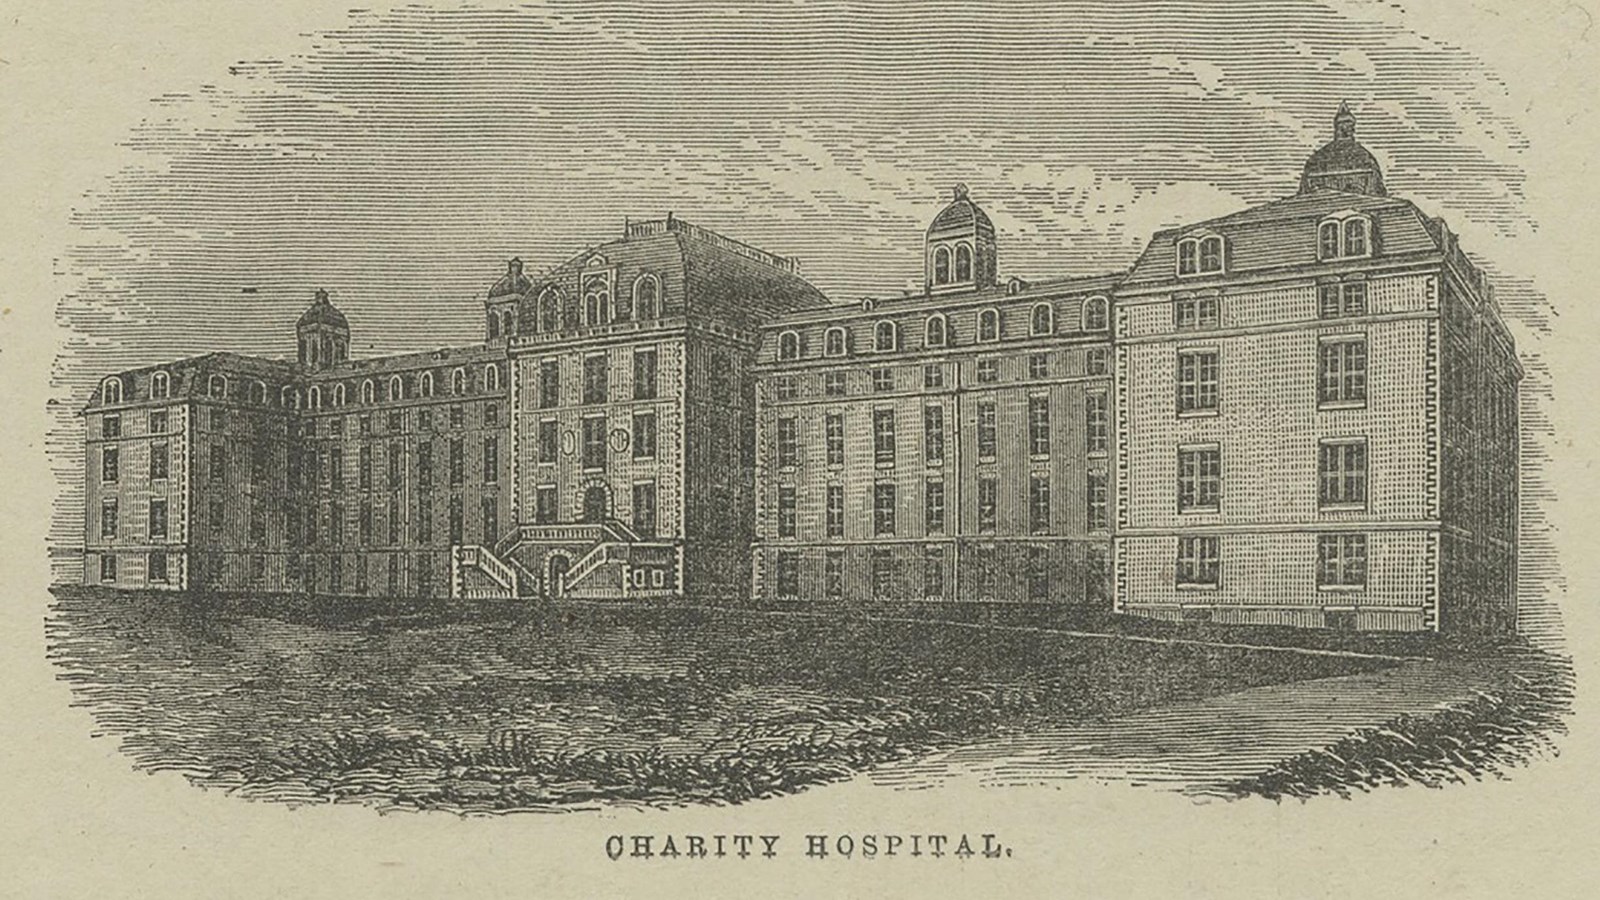 exterior of the hospital. NYPL image